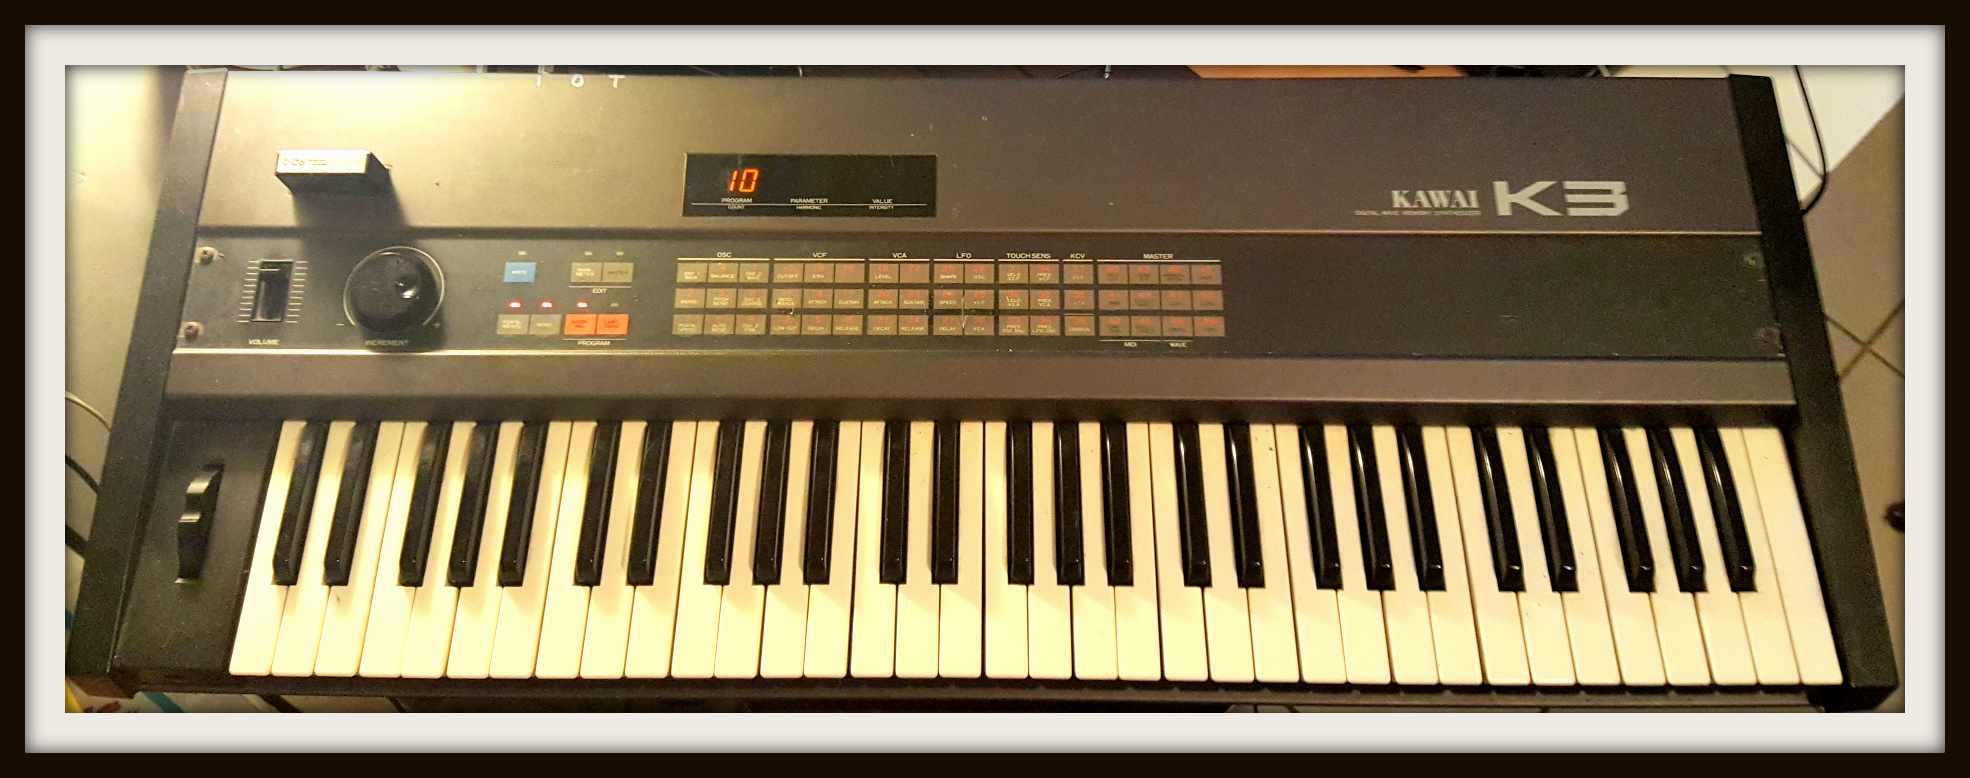 Ned's Kawai K3. Purchased new in 1987.